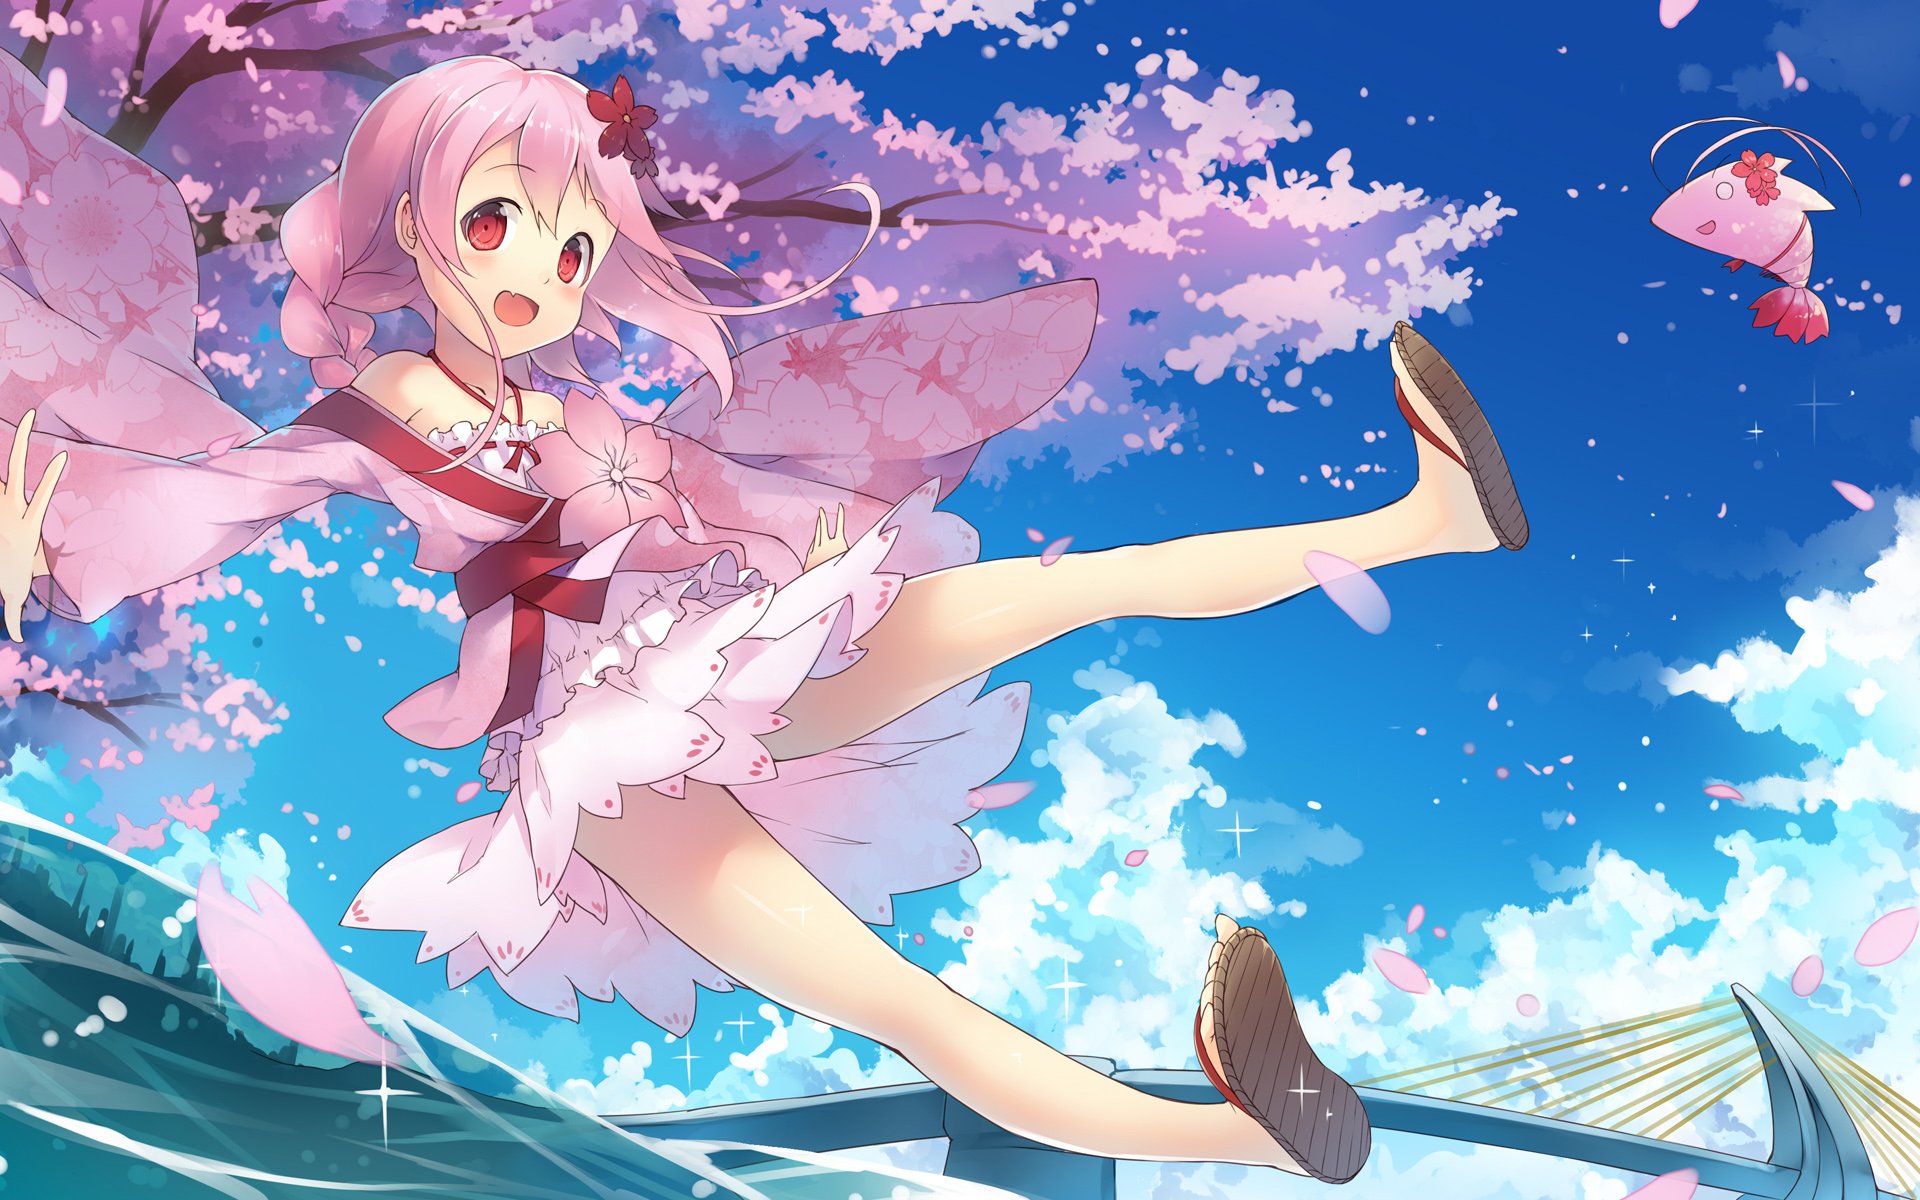 blush, Braids, Cherry, Blossoms, Clouds, Fang, Fred04142, Japanese, Clothes, Loli, Long, Hair, Necklace, Petals, Pink, Hair, Red, Eyes, Sergestid, Shrimp, Tree Wallpaper